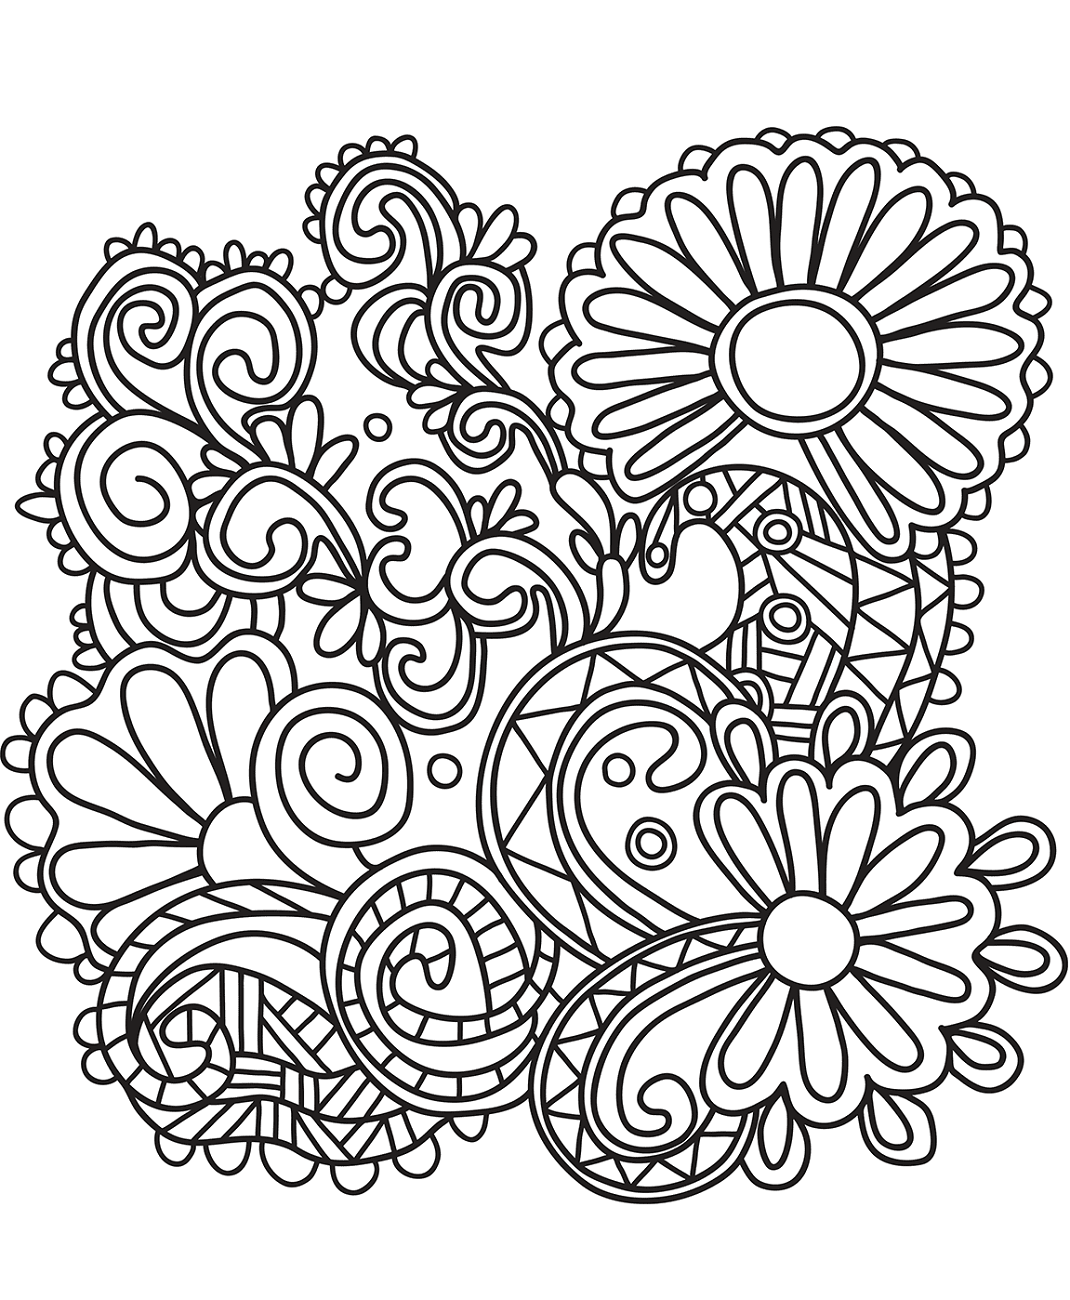 Sunflowers Doodle Art Coloring Page - Free Printable Coloring Pages for